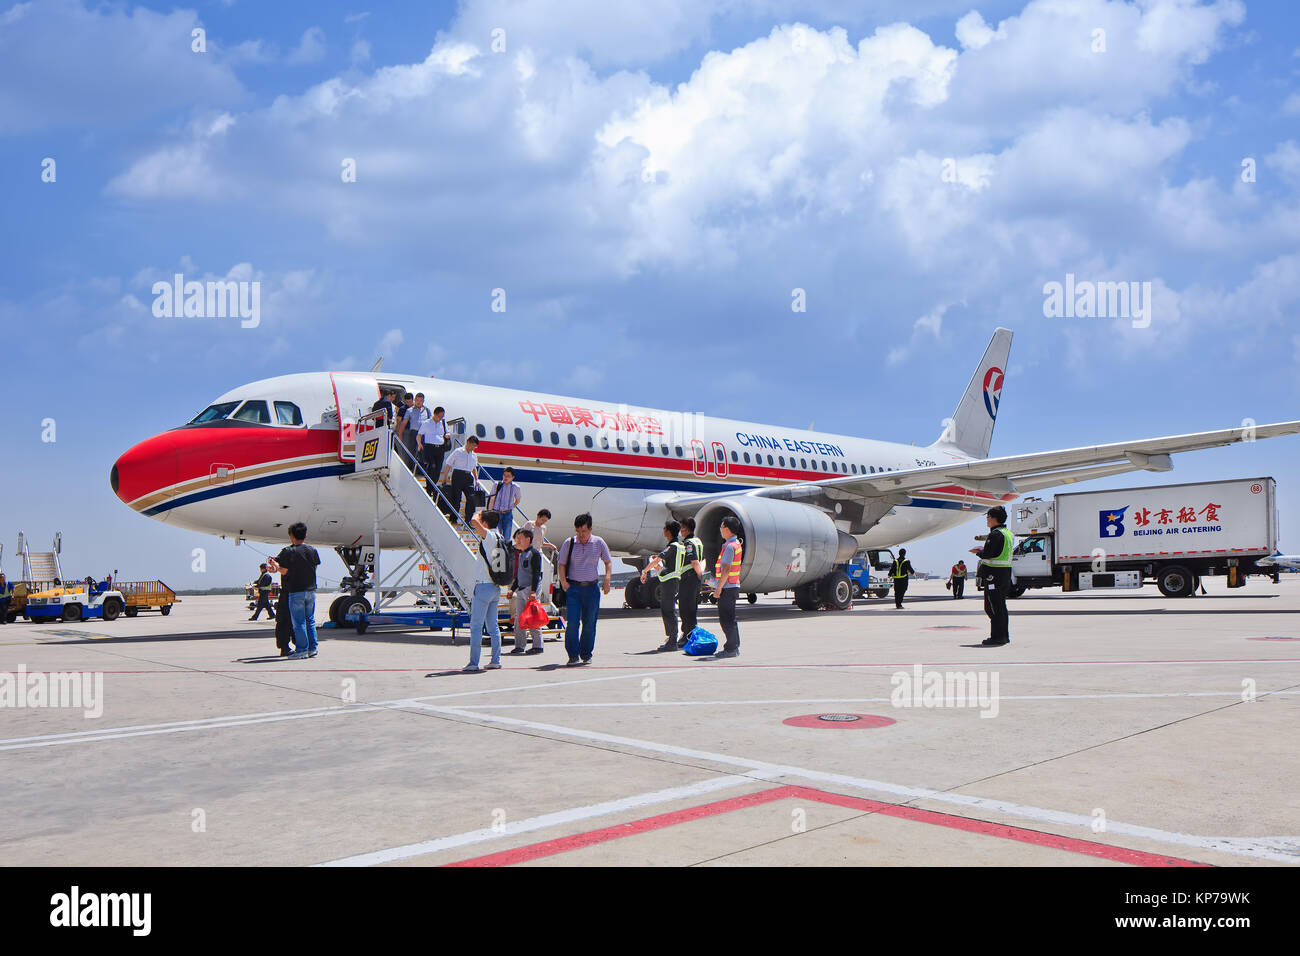 BEIJING-MAY 27, 2014. Passengers come out airplane on Beijing Airport. Because of China's prosperity a growing middle-class want to travel. Stock Photo